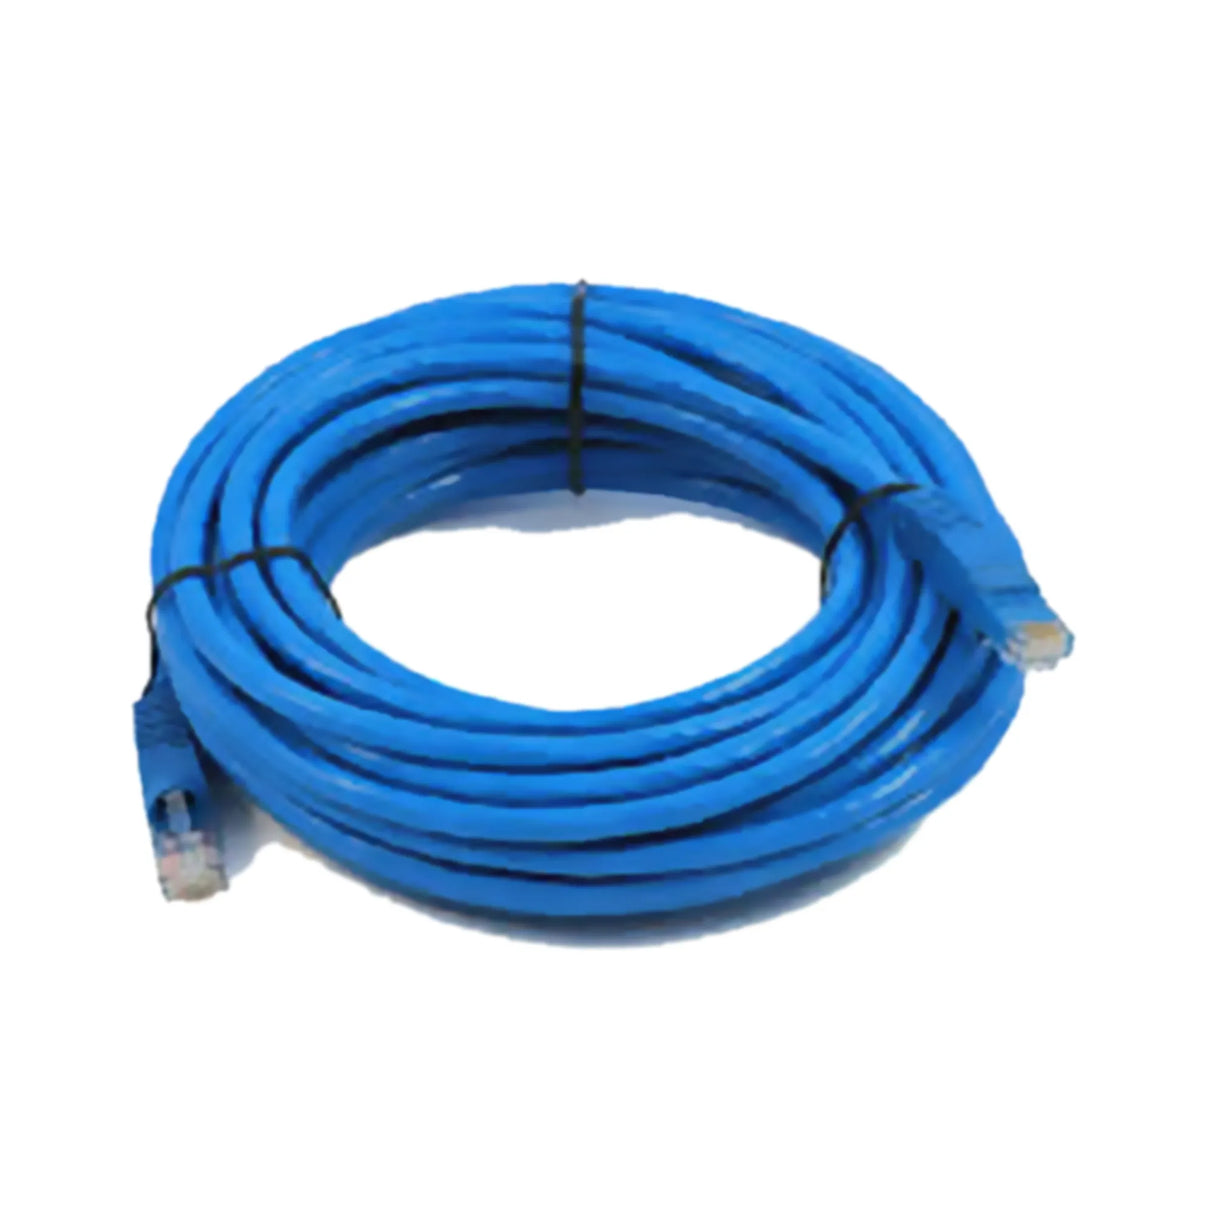 ClearOne 910-3200-204-50 50-Foot RJ45 Cat6 Cable